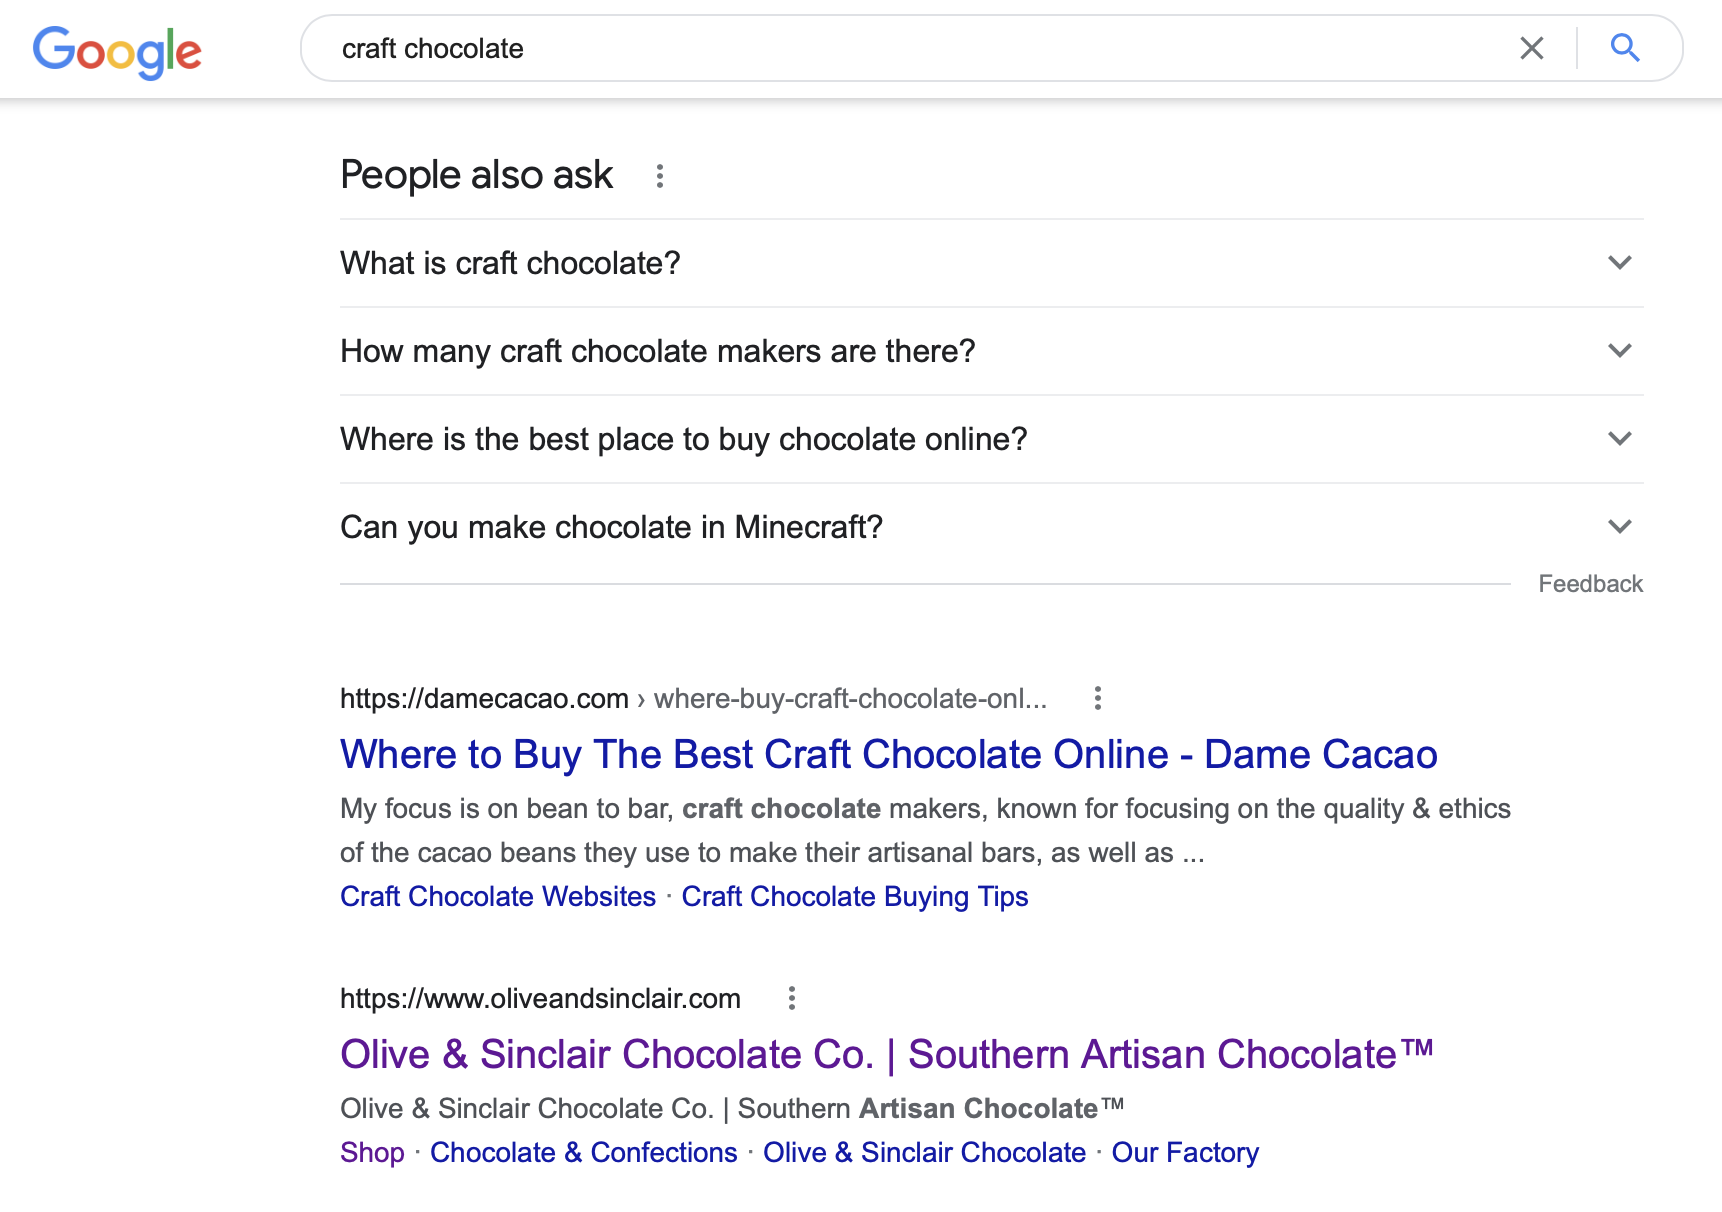 olive and sinclair food marketing has great seo